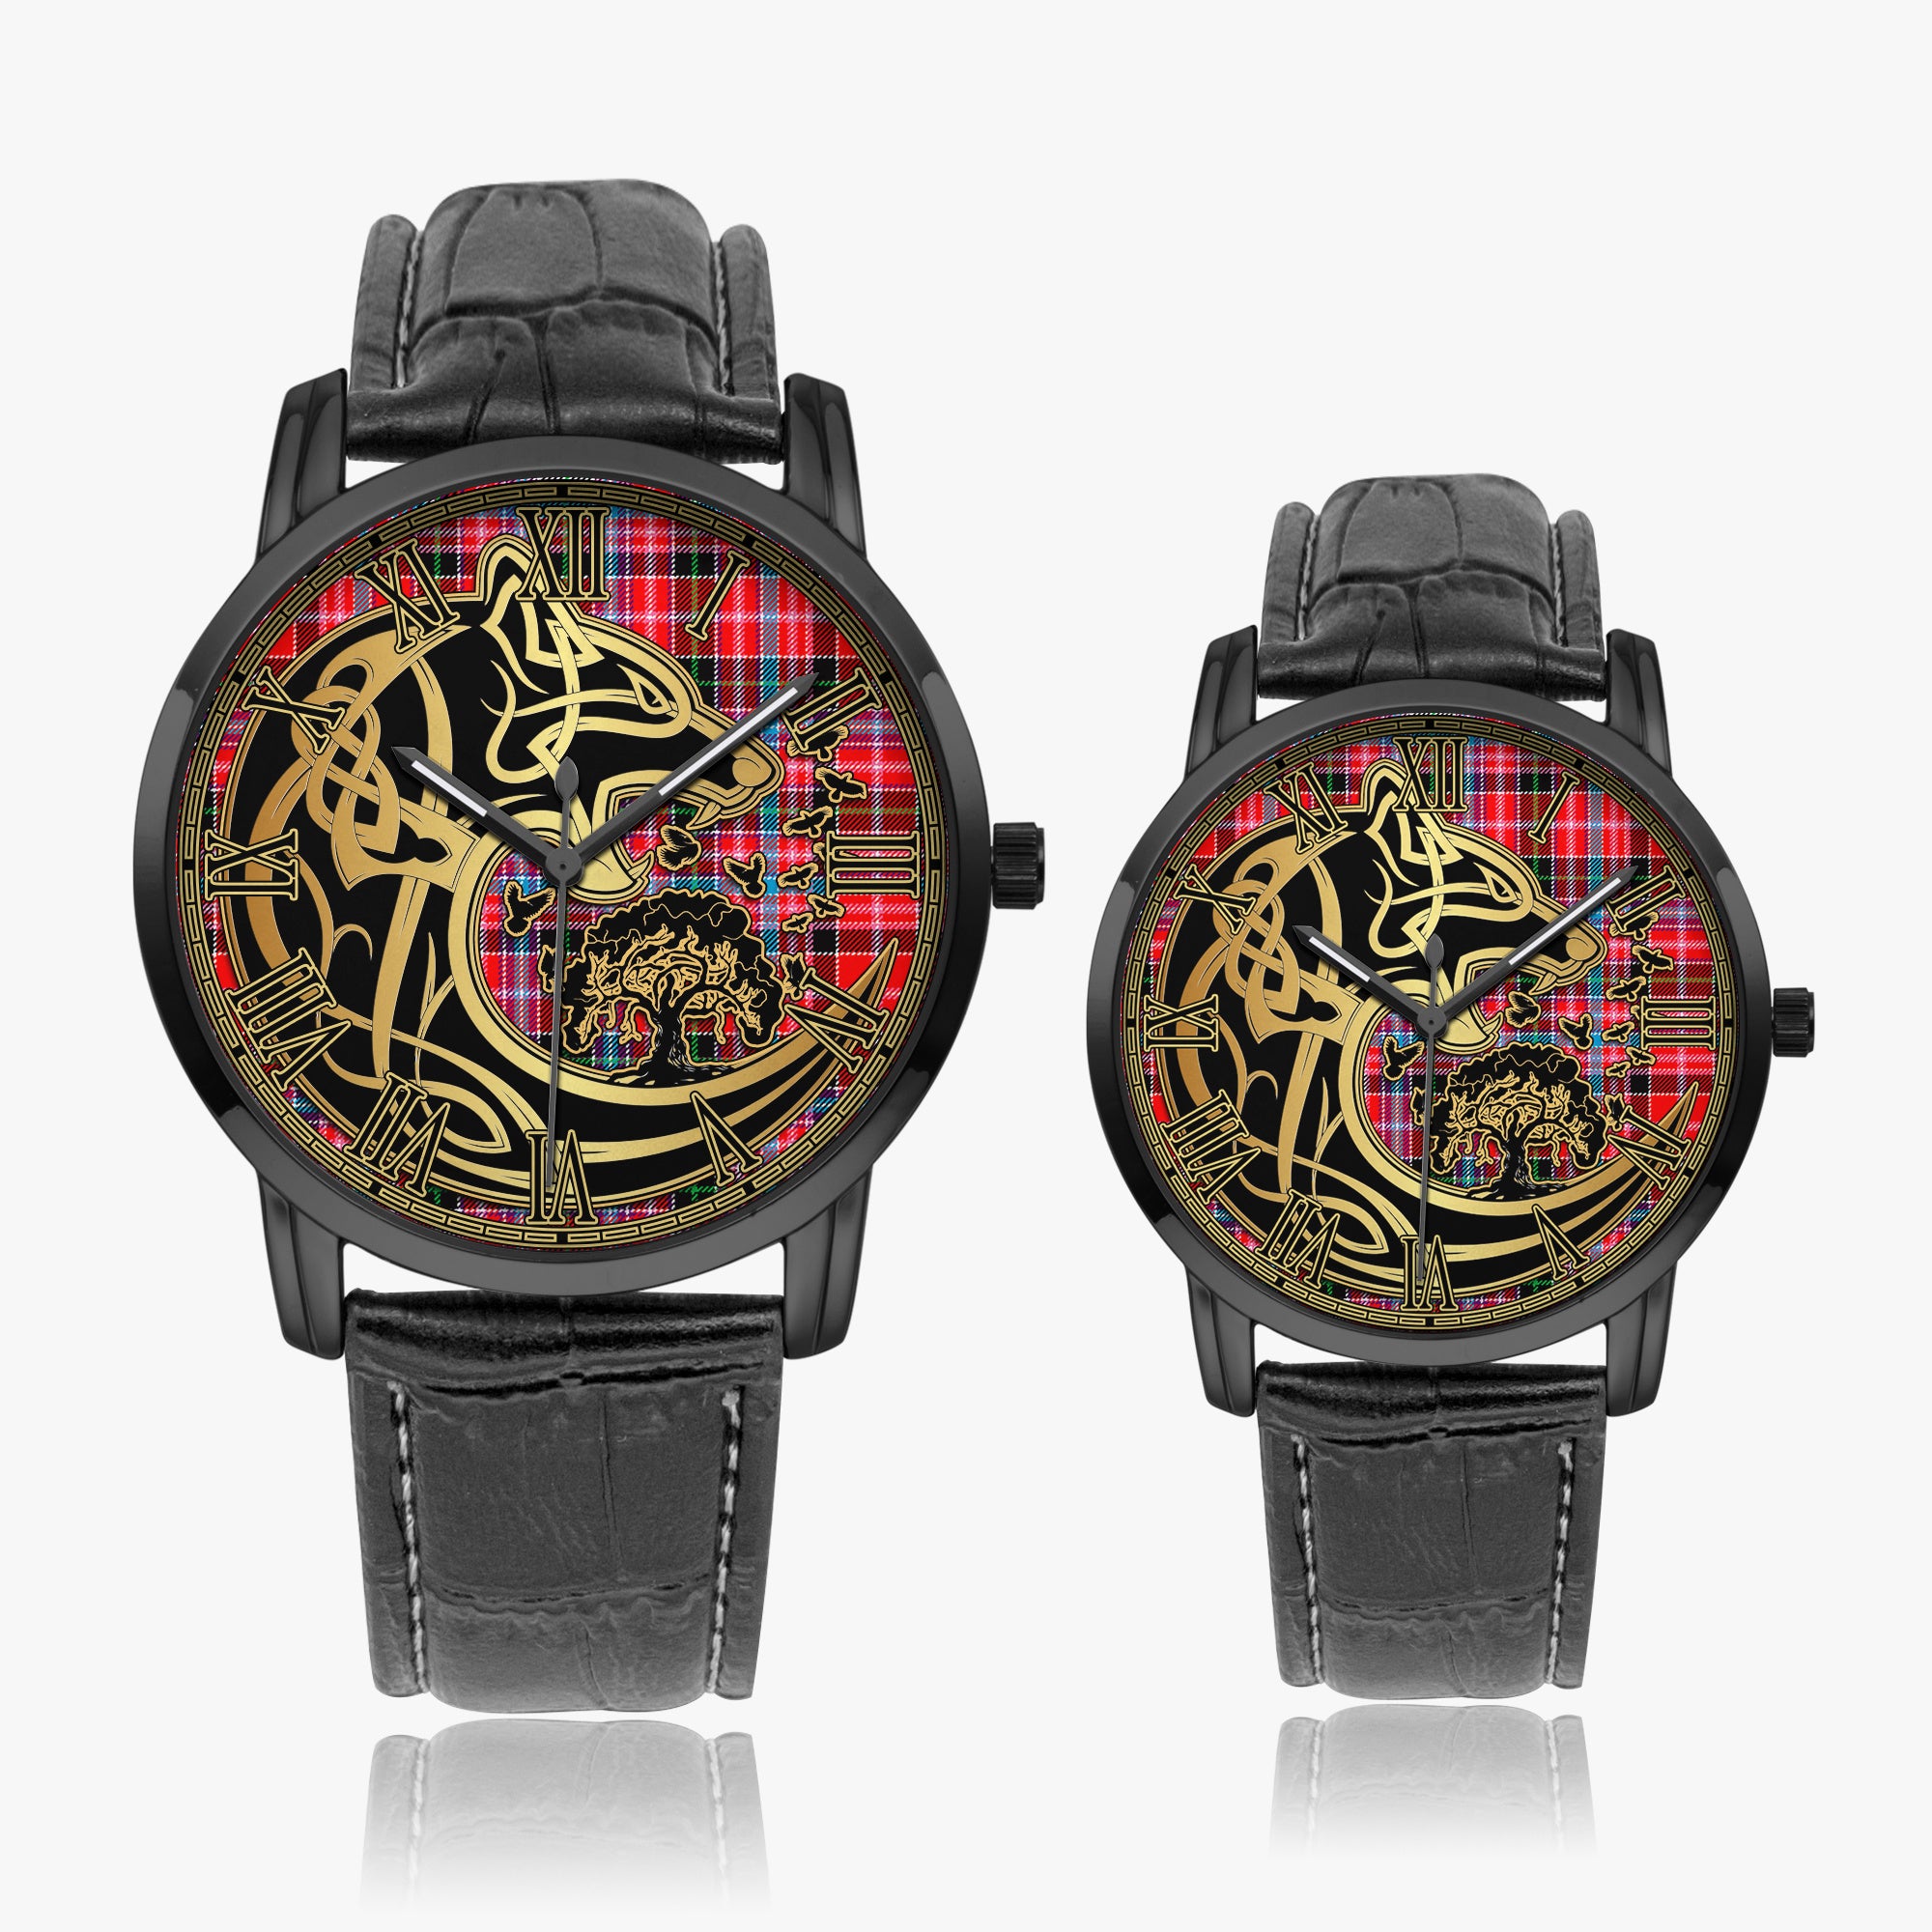 udny-tartan-watch-with-leather-trap-tartan-instafamous-quartz-leather-strap-watch-golden-celtic-wolf-style